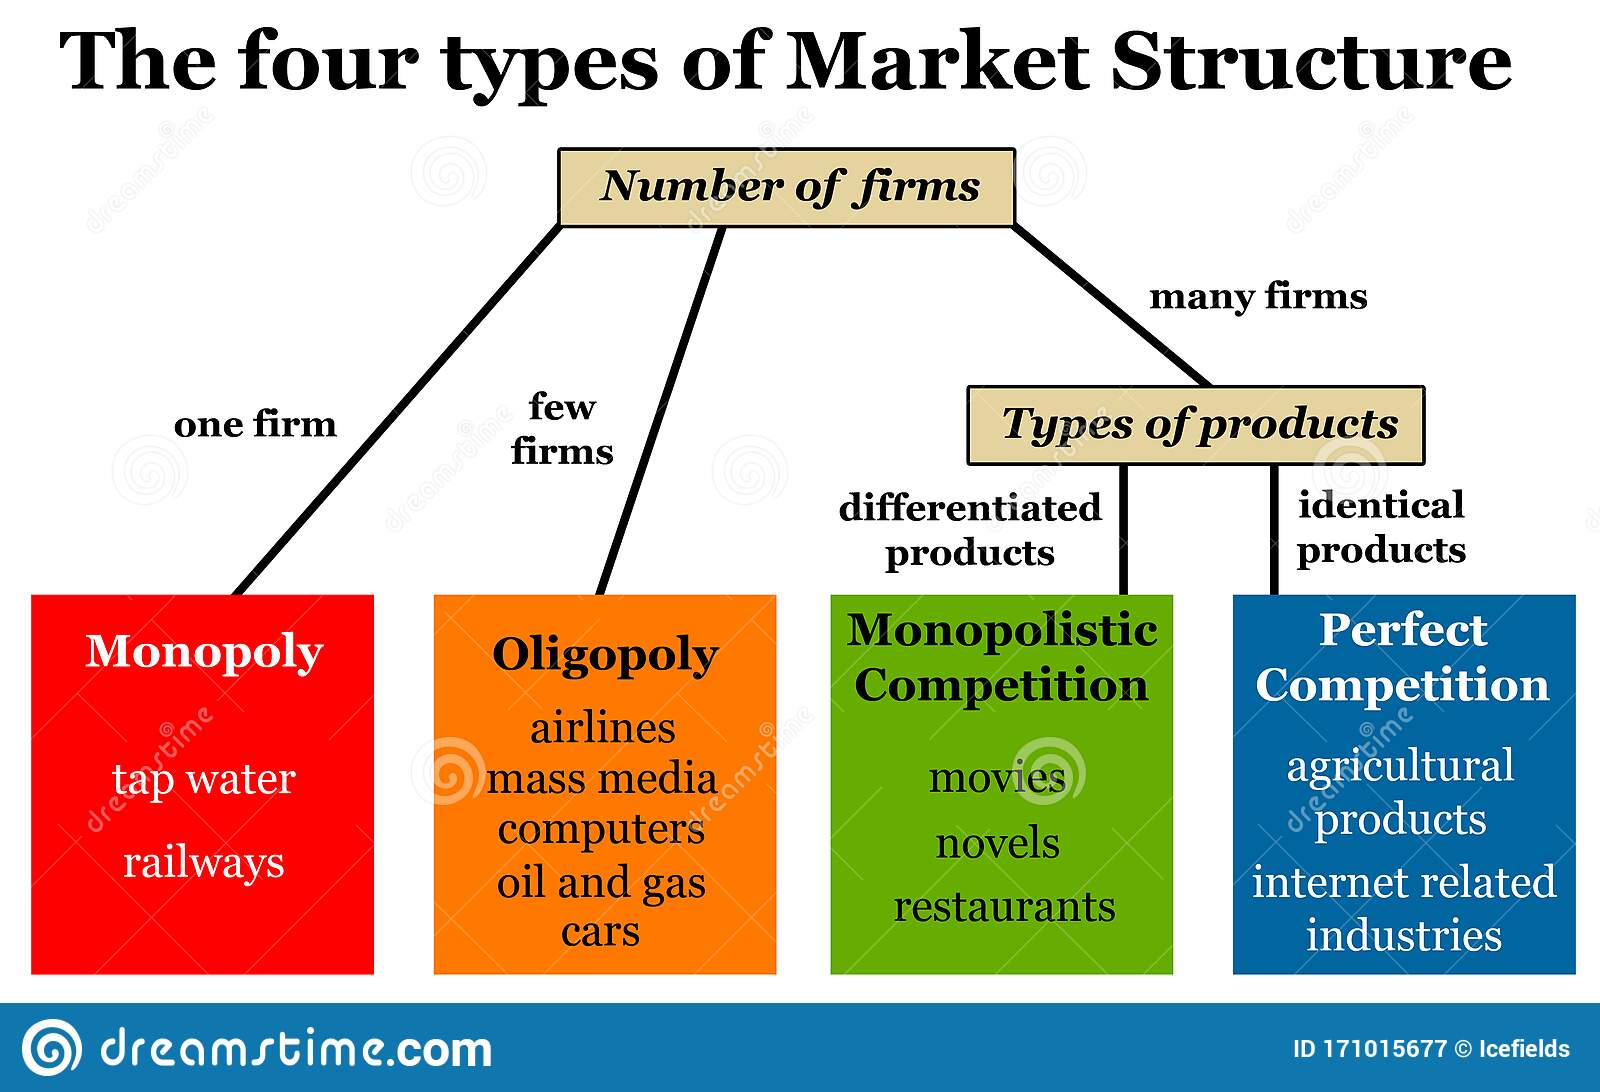 what are the basic concept of market structure